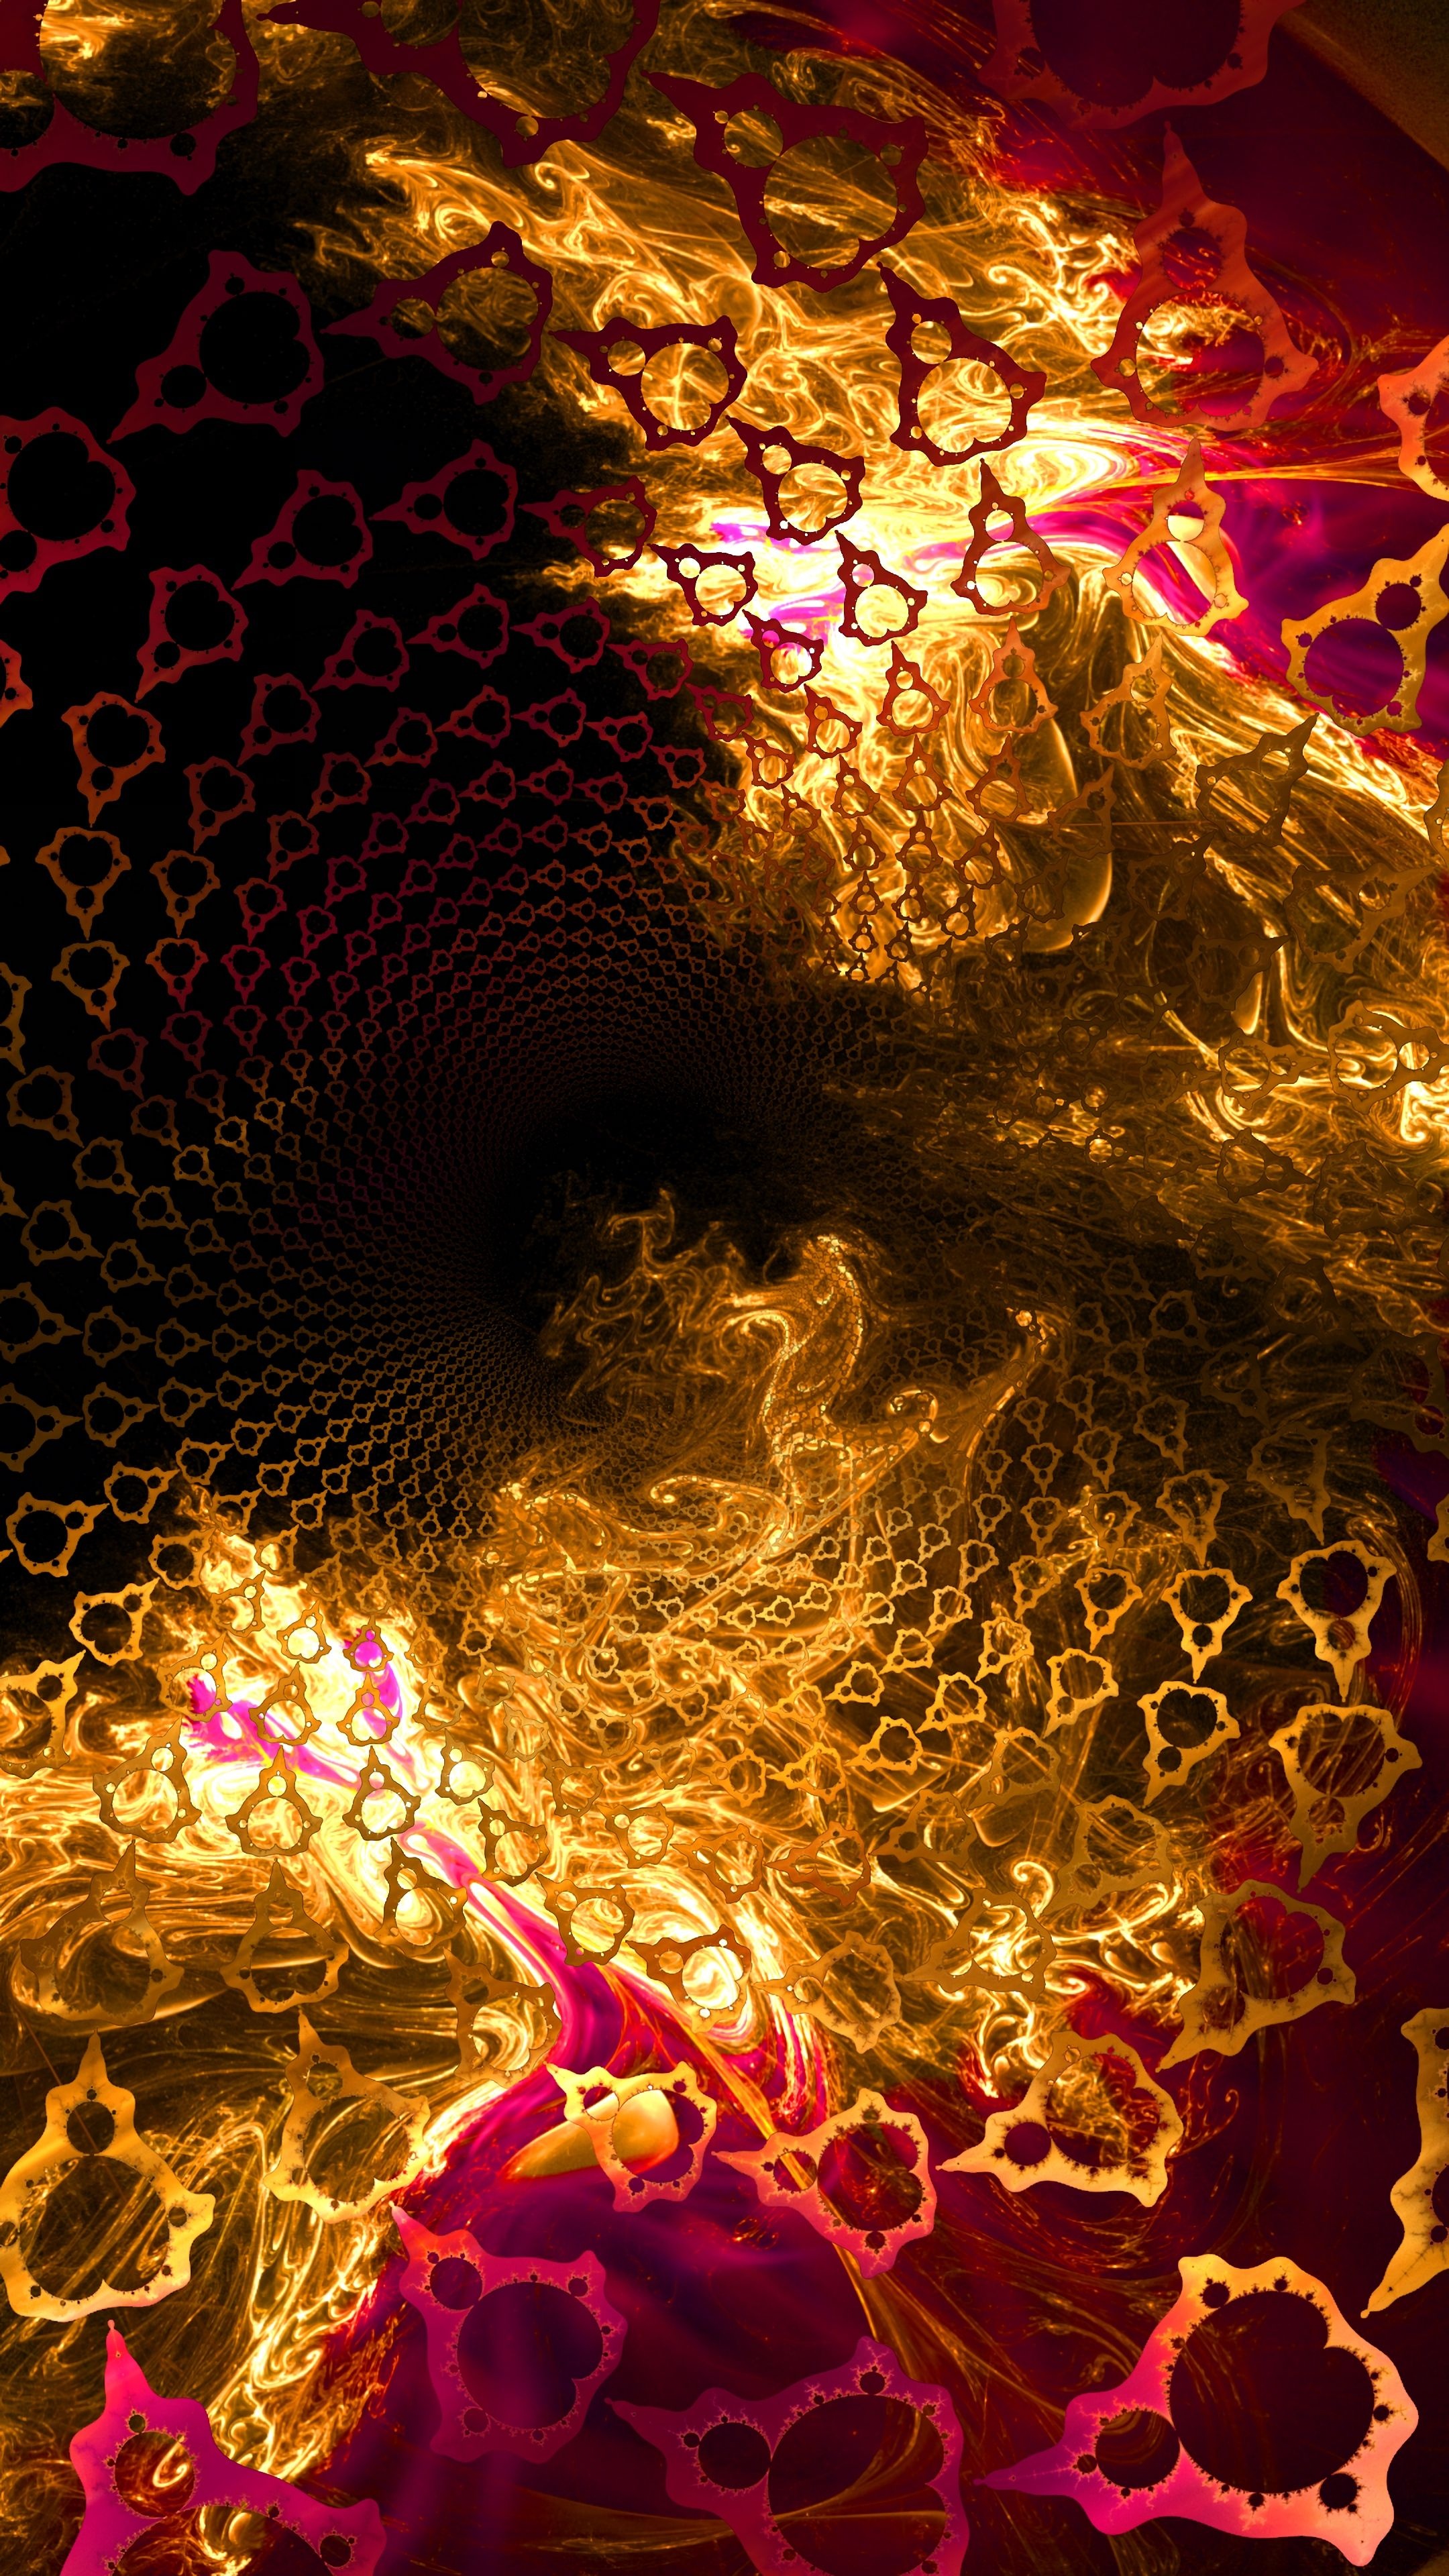 Fractal wallpapers, Light water fire pattern, Colorful imagery, Abstract design, 2160x3840 4K Handy